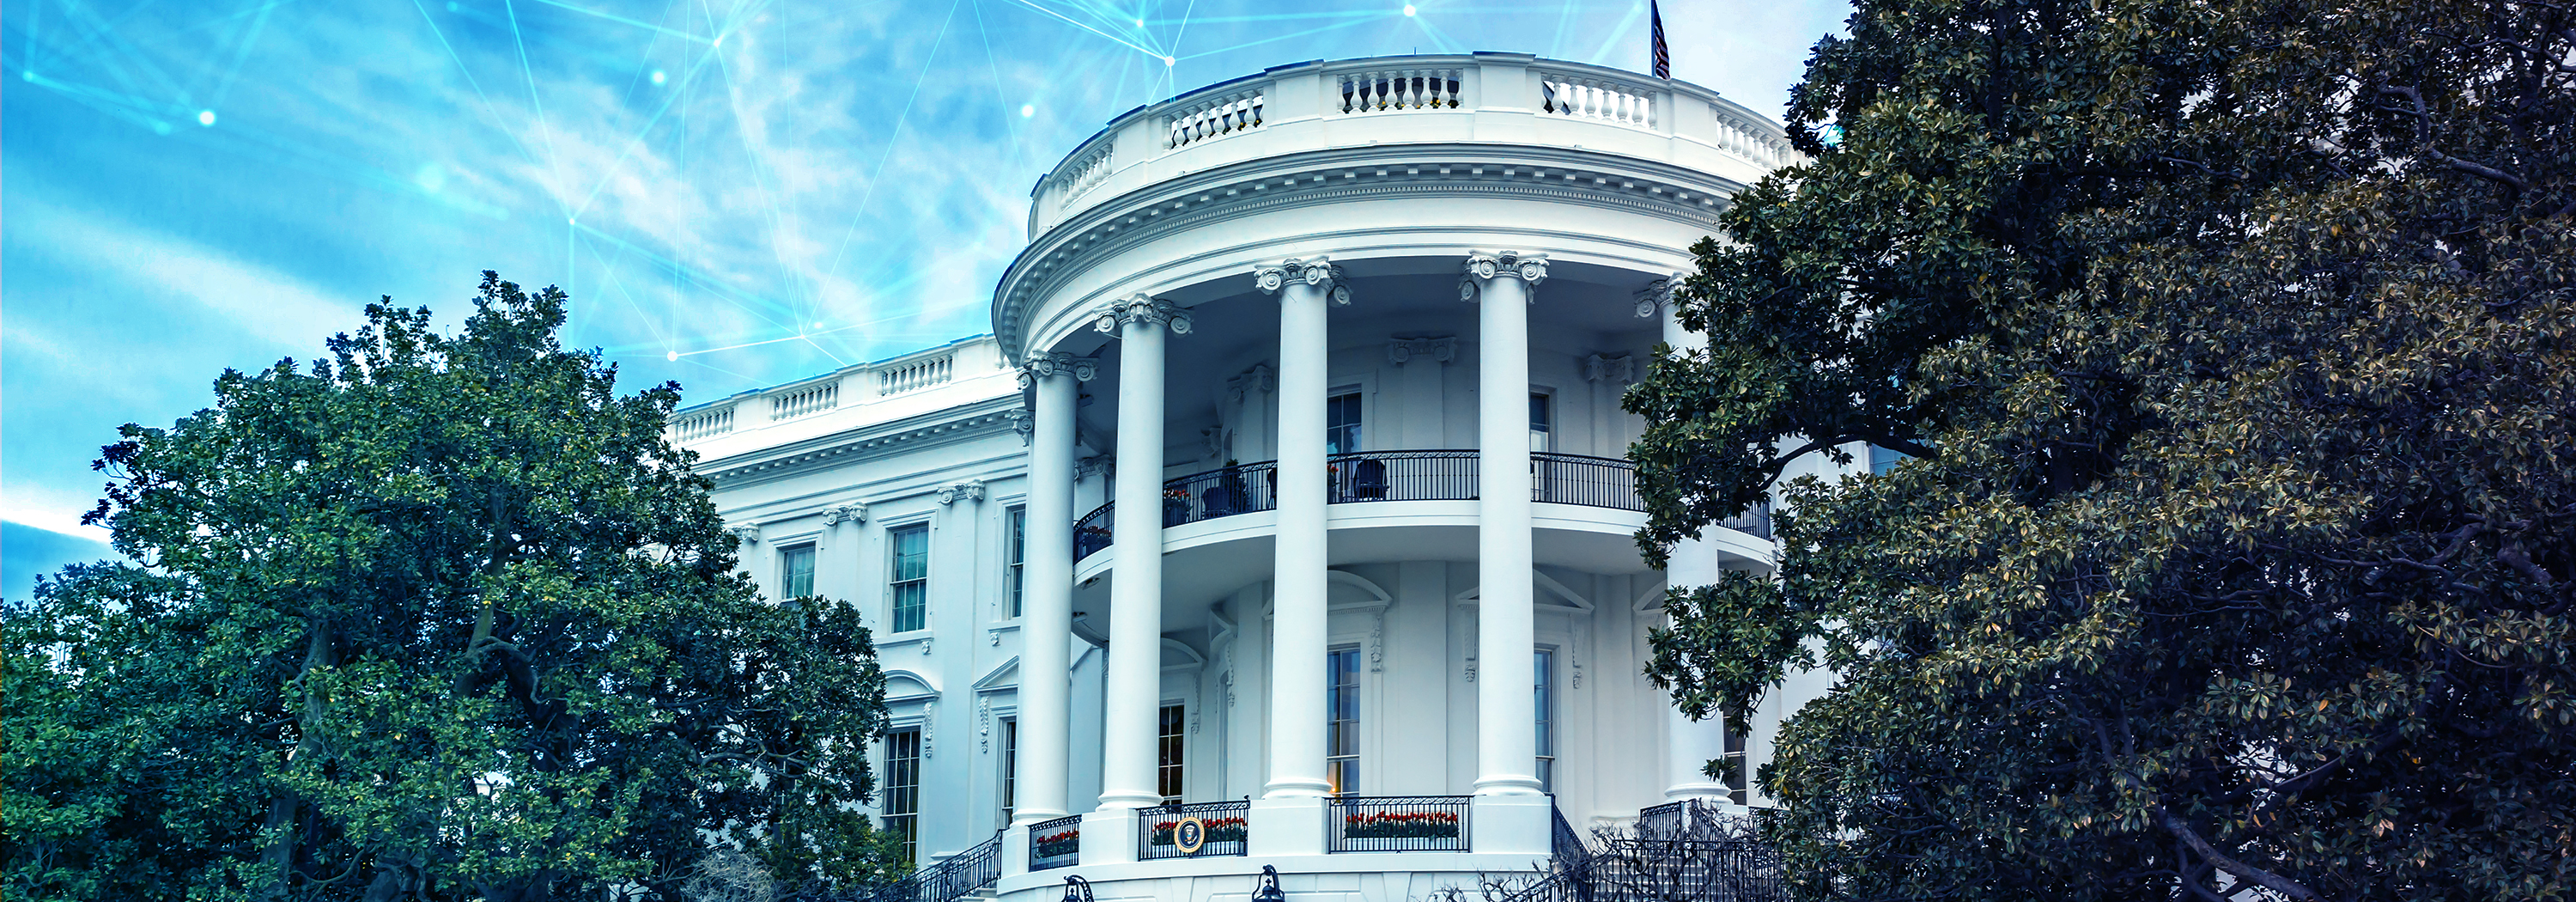 The 2021 Executive Order Has Changed Today’s Cybersecurity Landscape